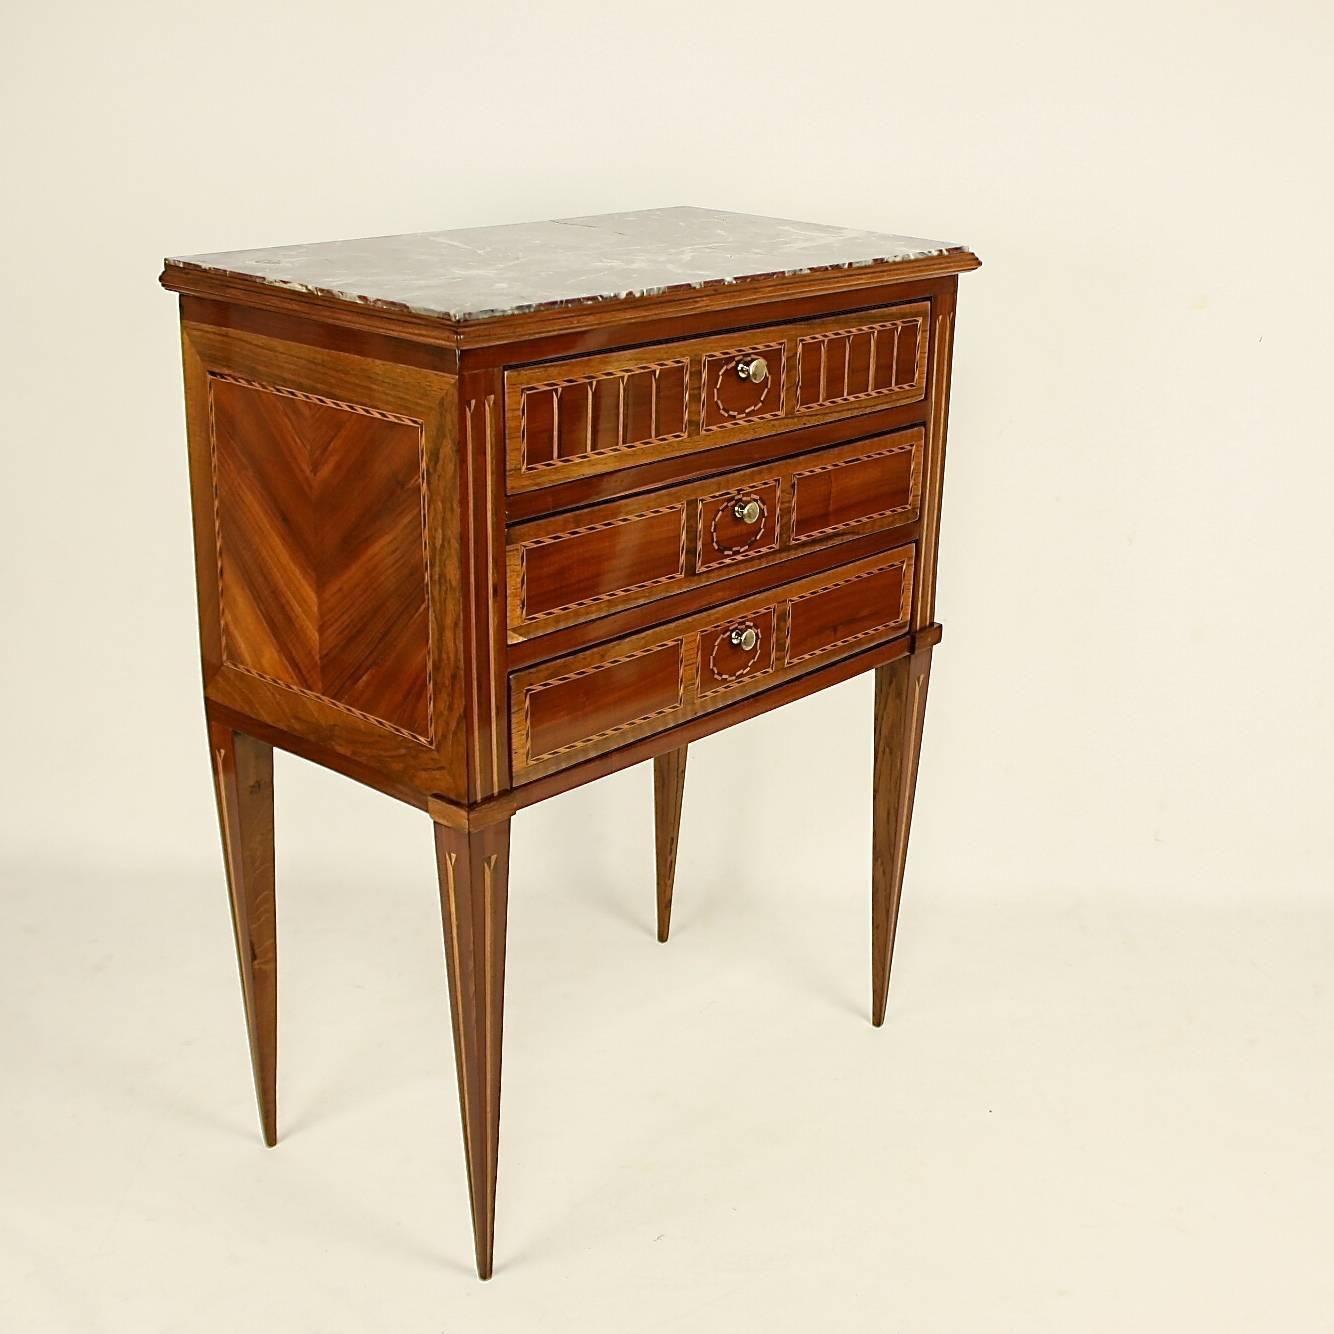 Late 18th century Louis XVI side table or ' Table Chiffoniere' in the manner of Nicolas Petit (1732-1791), with a rectangular inset dark red marble top above three drawers, decorated with fillet marquetry, the sides and square tapering legs inlaid